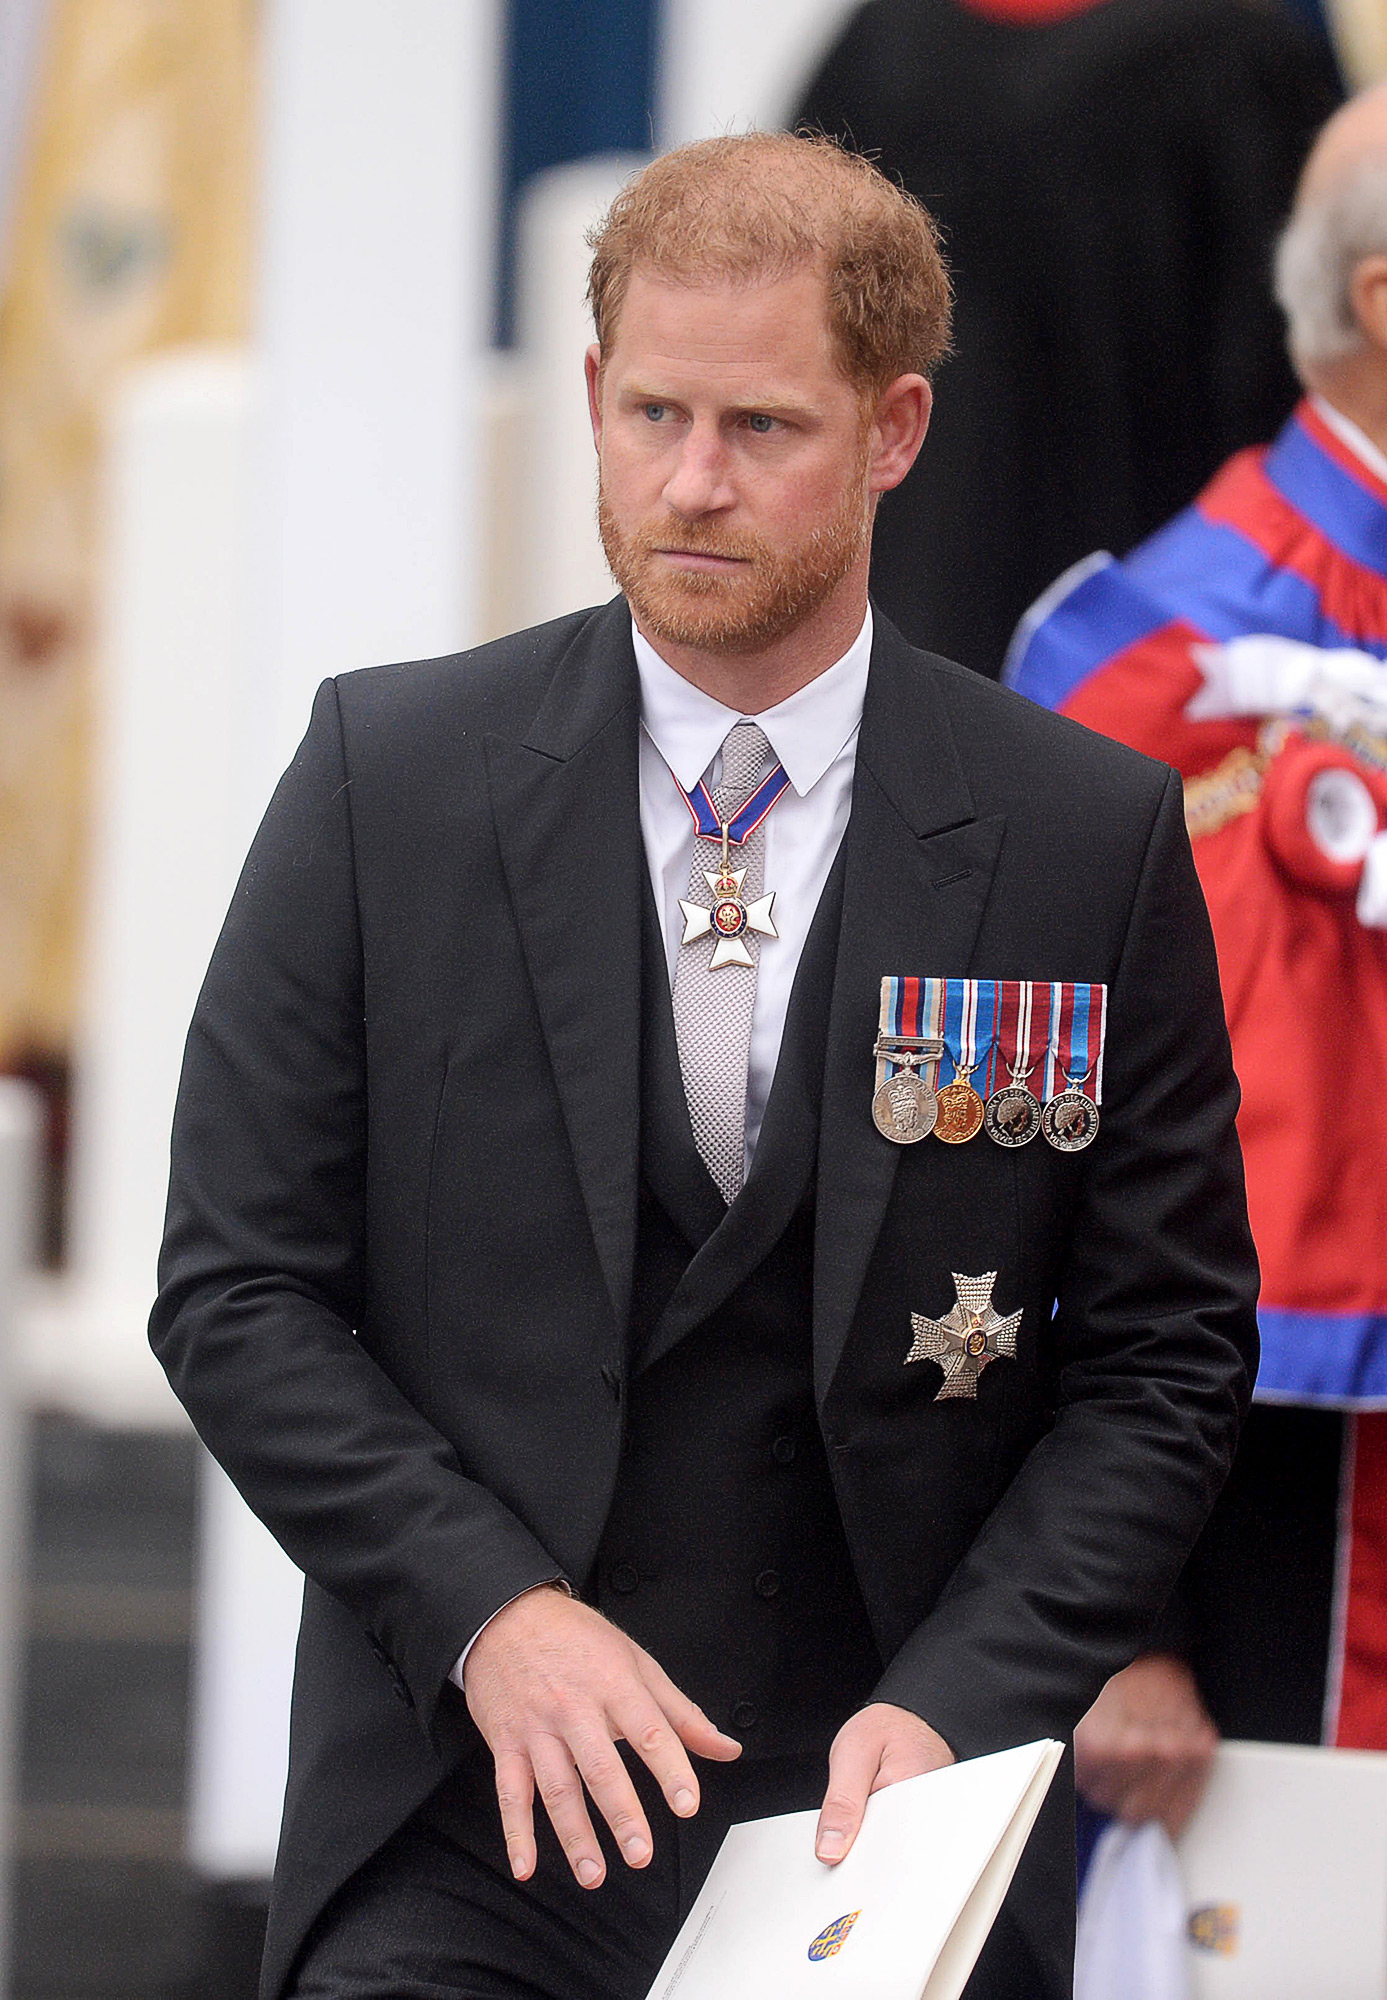 spare by prince harry